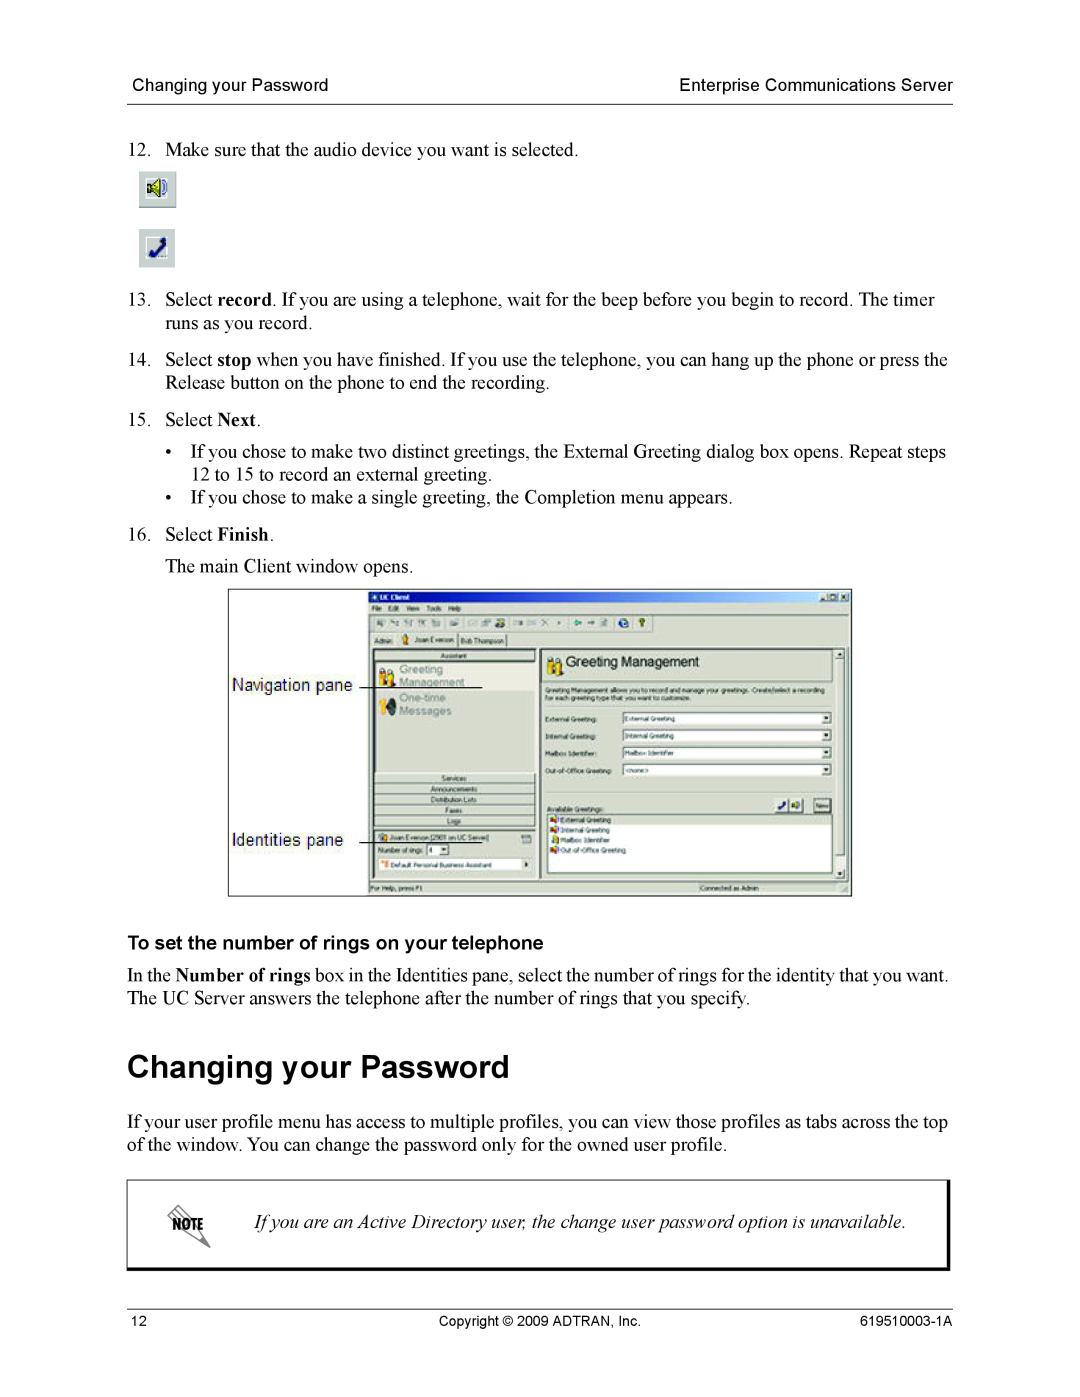 ADTRAN 619510003-1A manual Changing your Password, To set the number of rings on your telephone 